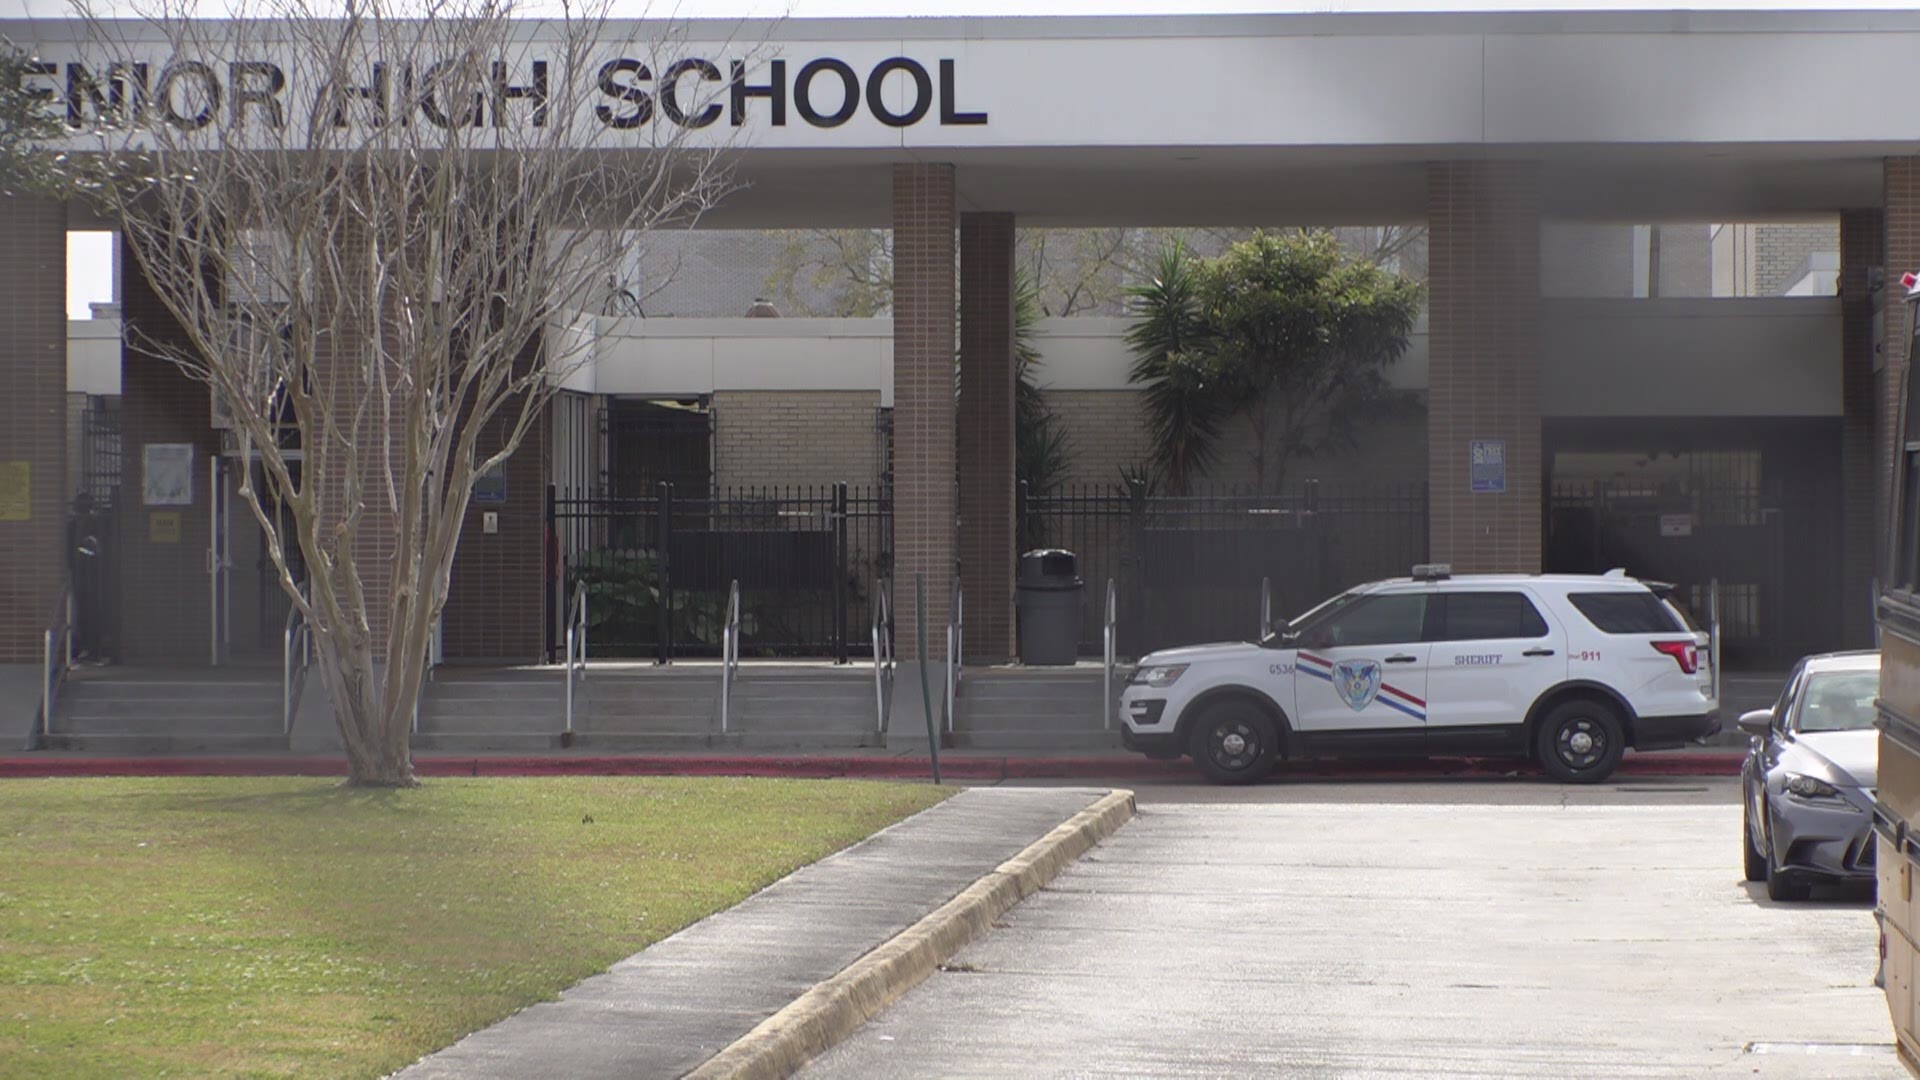 On Friday, students protested a violent incident at L.W. Higgins High School involving a JPSO deputy and student.